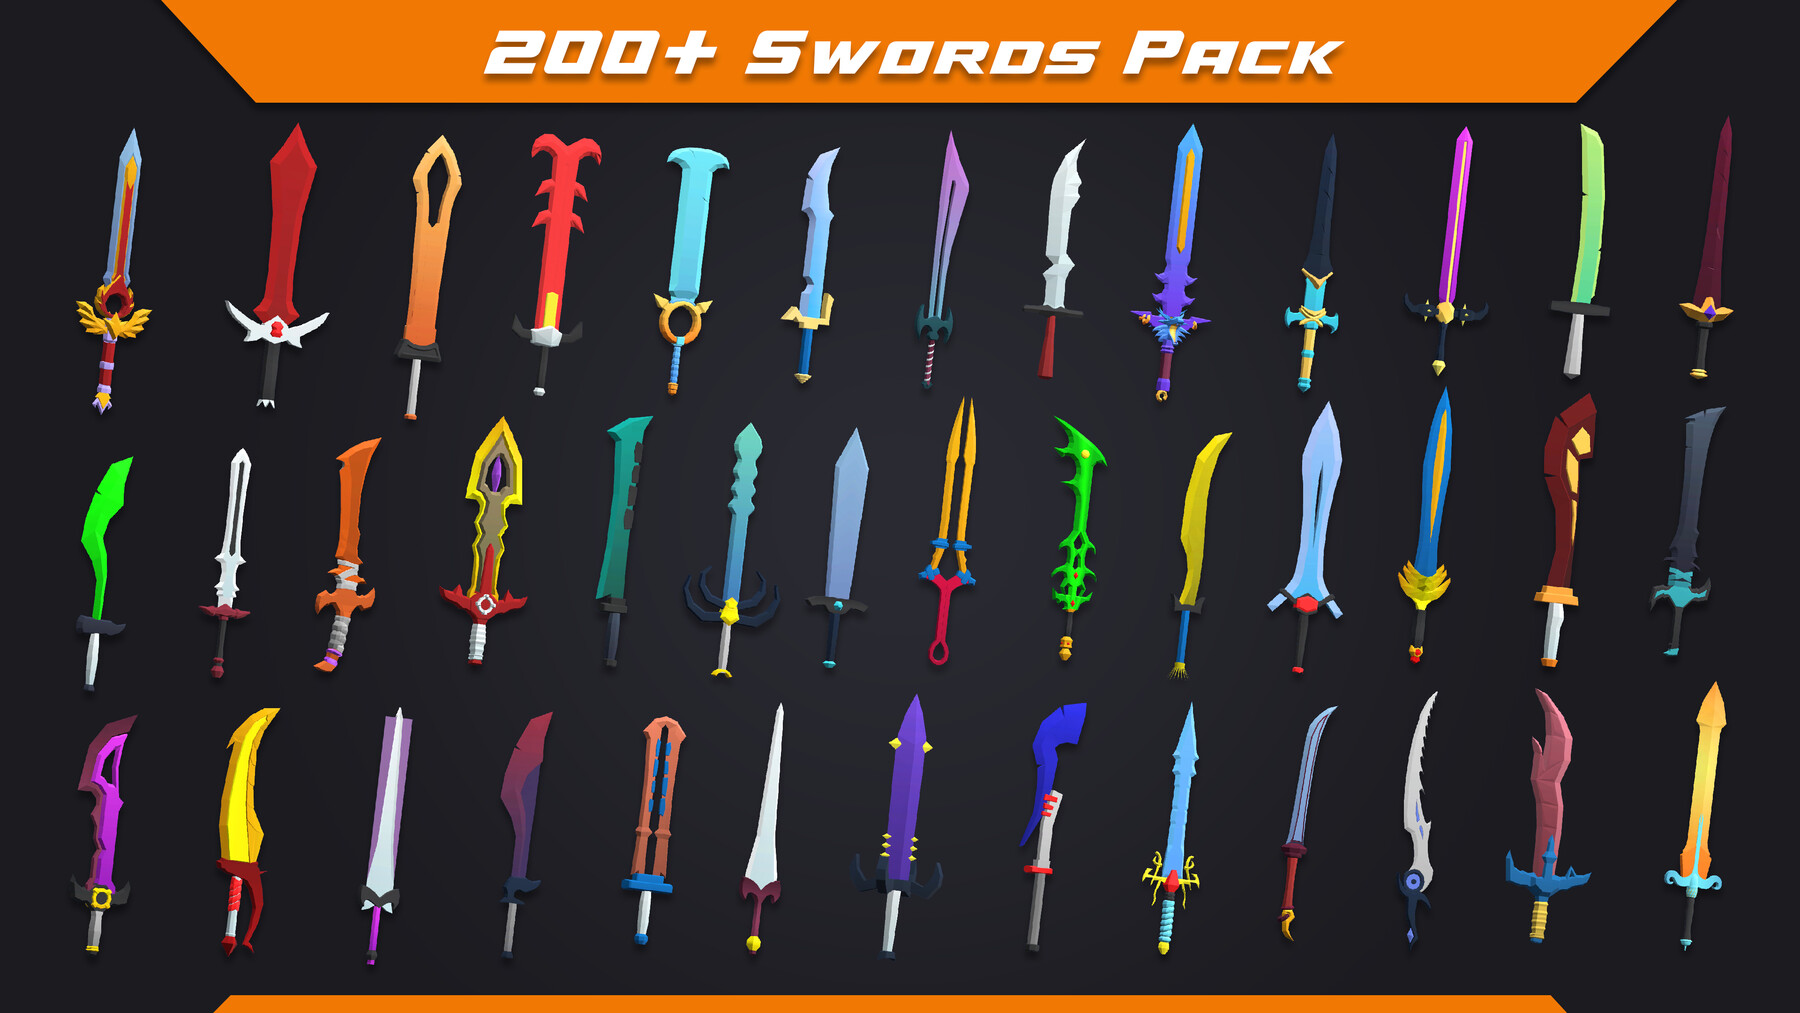 ArtStation - Swords Pack - Stylized Low Poly | Game Assets